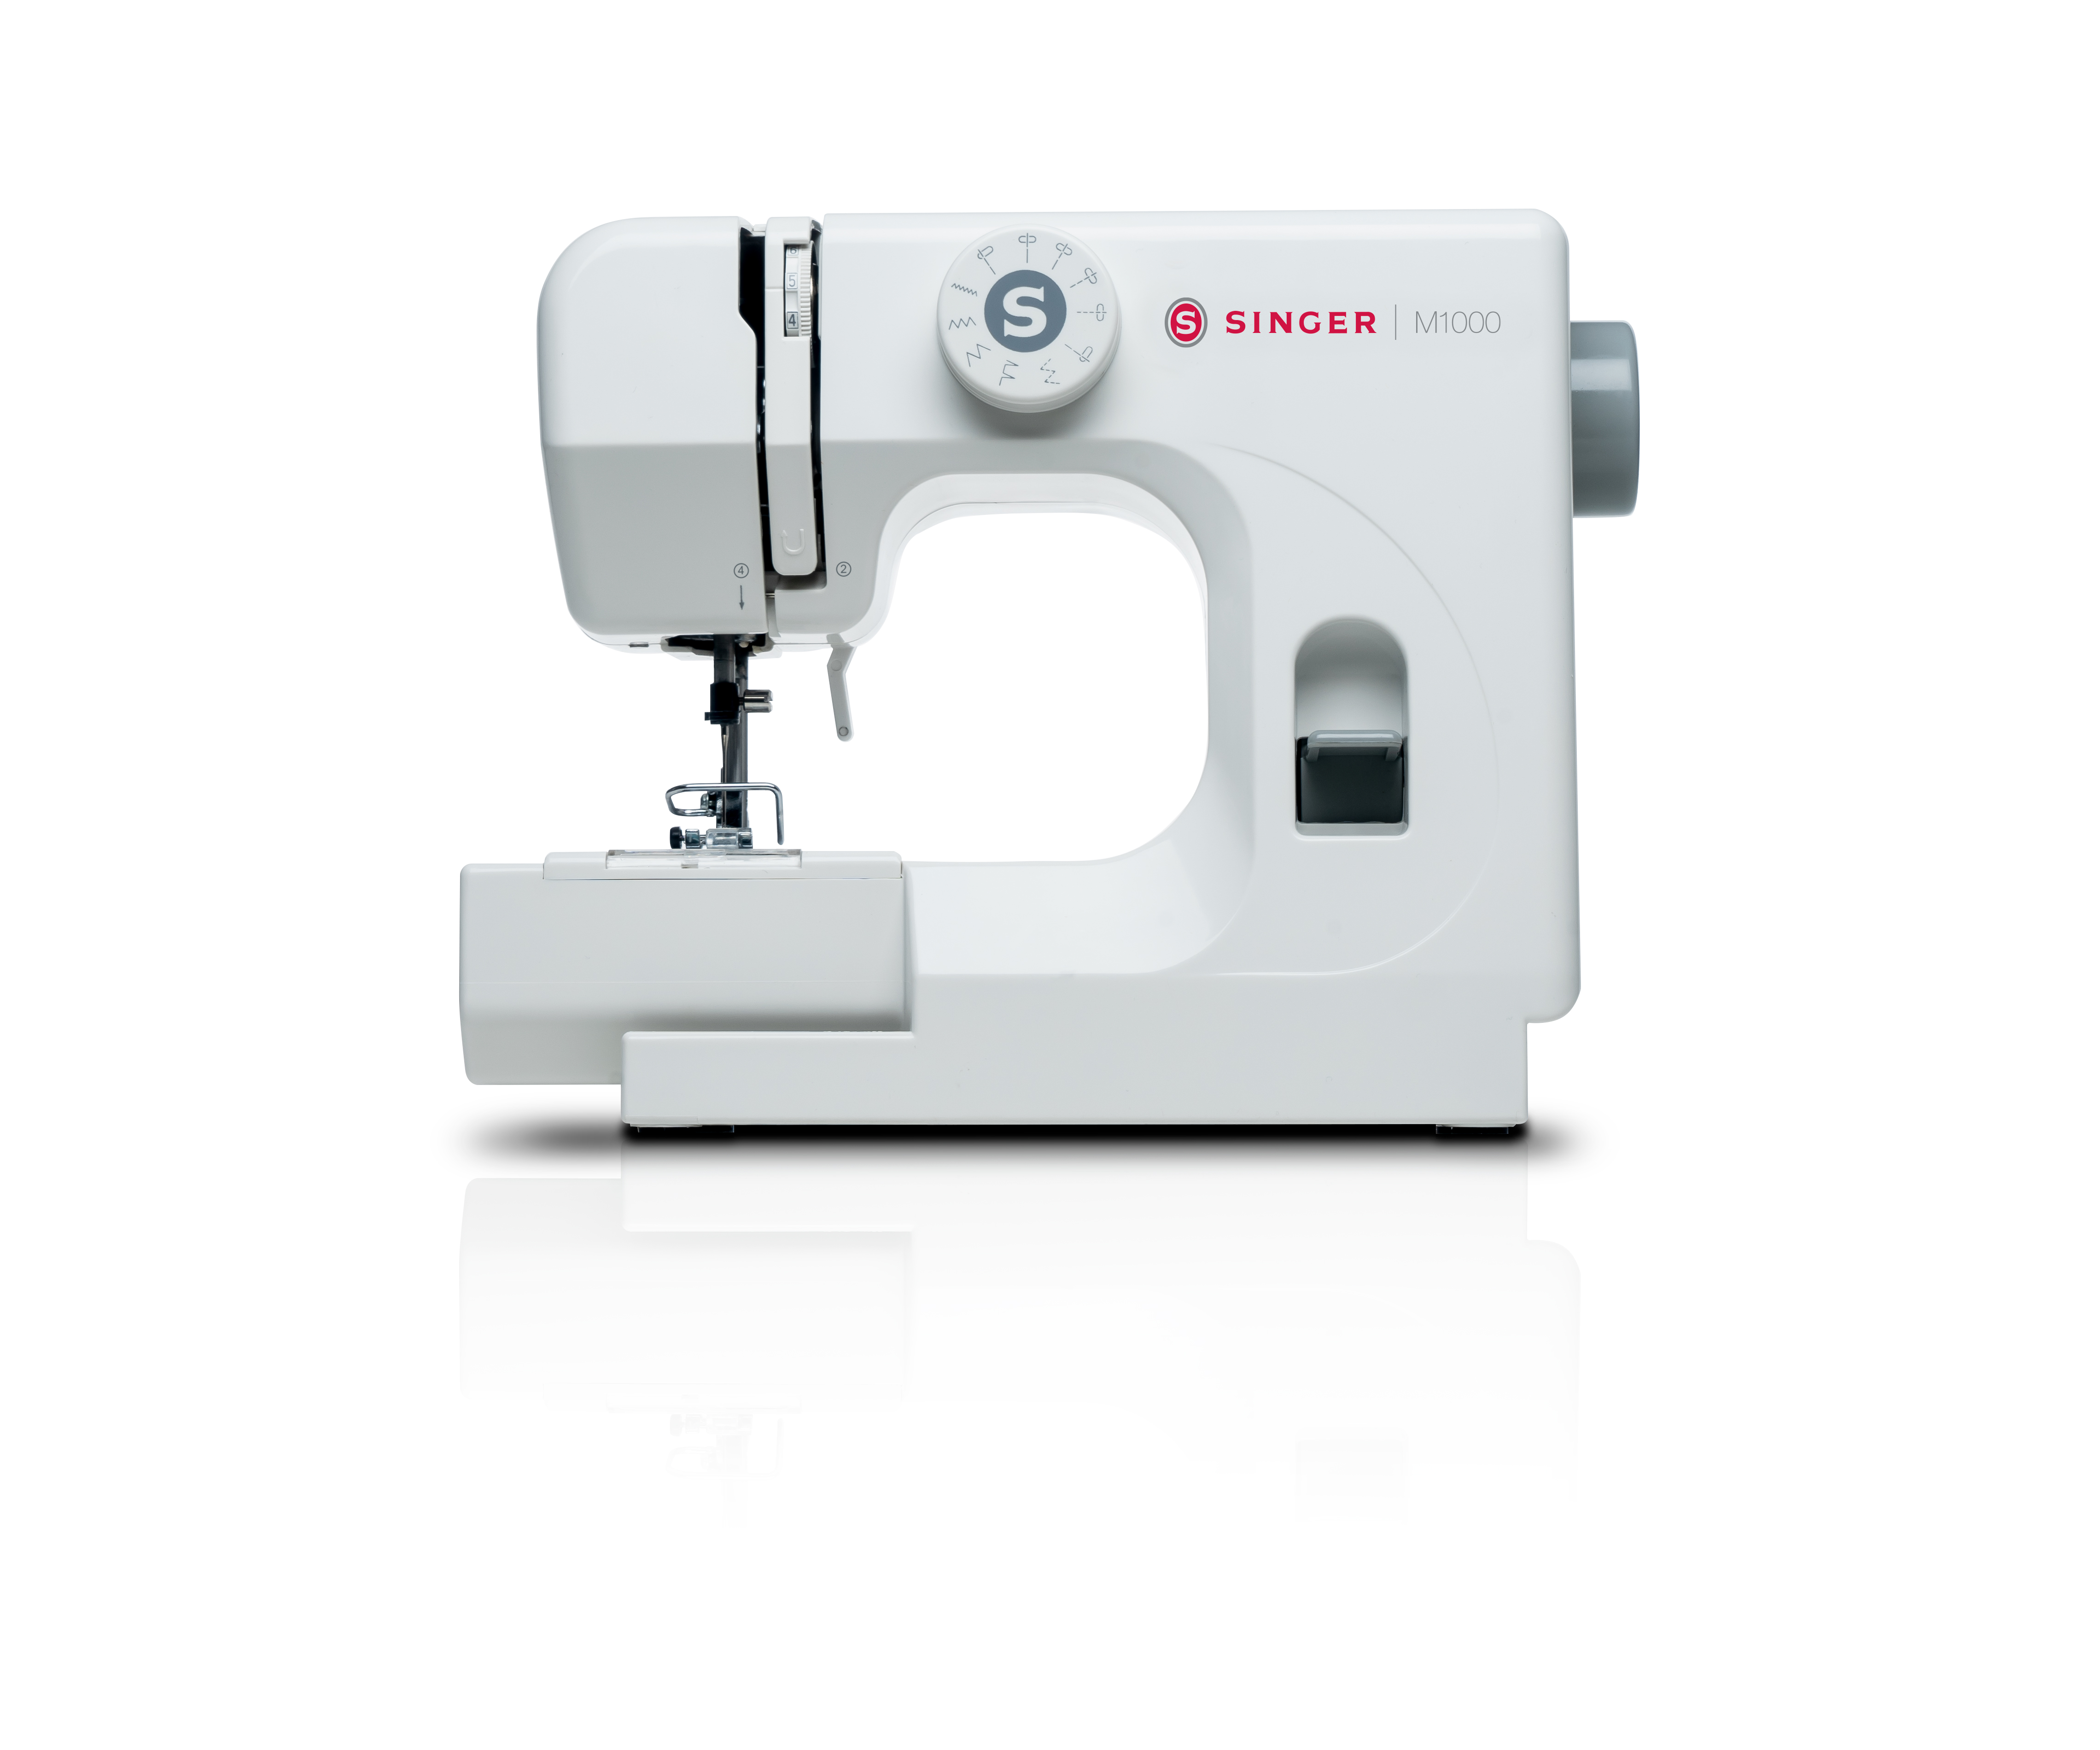 SINGER M1000 Mending Sewing Machine - Simple, Portable, Great for Beginners, Mending & Light Sewing - image 1 of 6